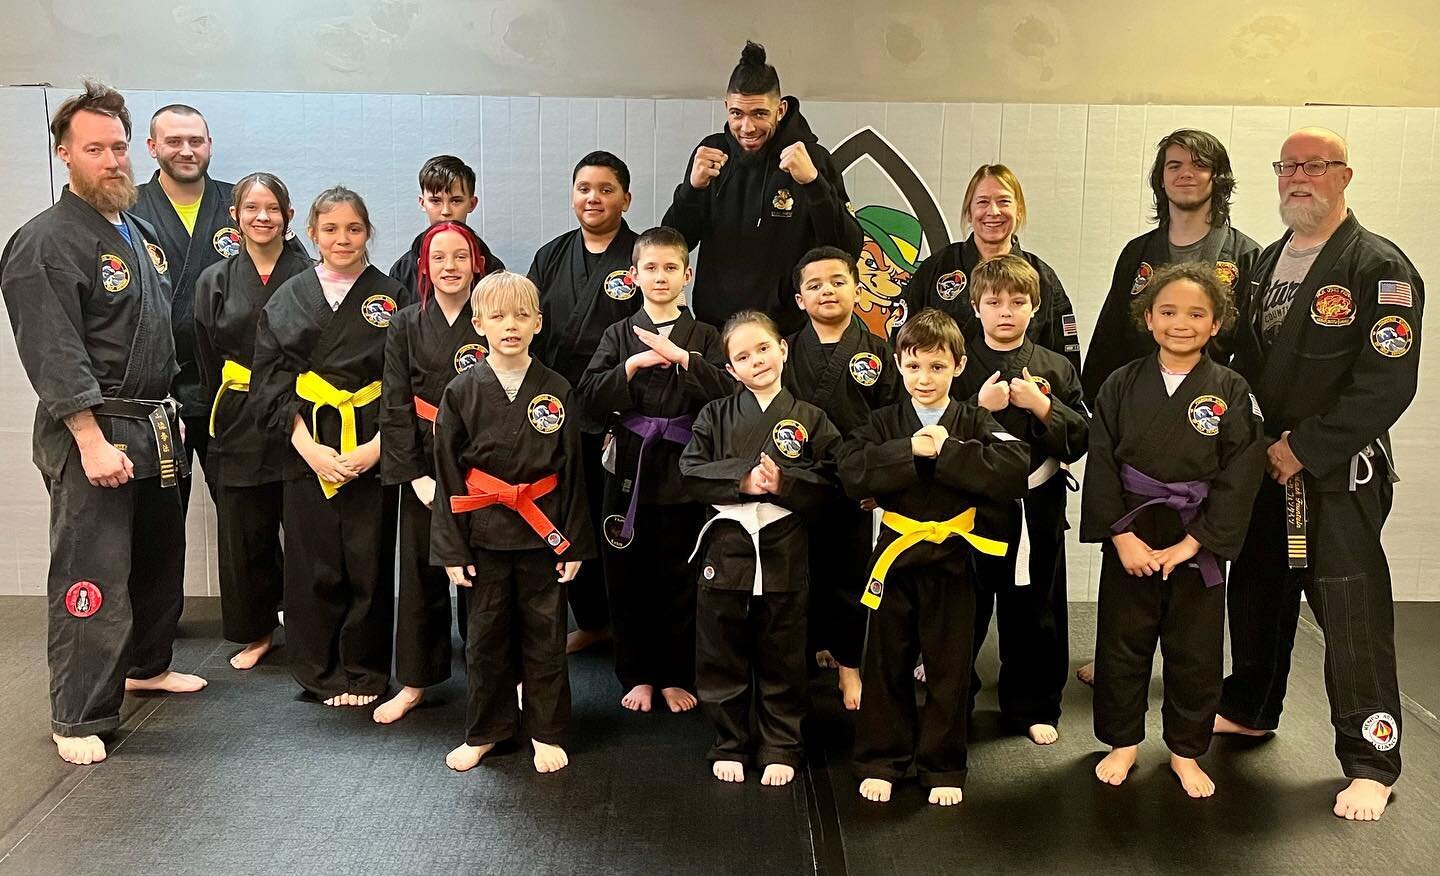 Fun things at the dojo.  Thank you Johnny Walker for visiting our kids class. You inspire. #kenpo #omaha #omahamagazine